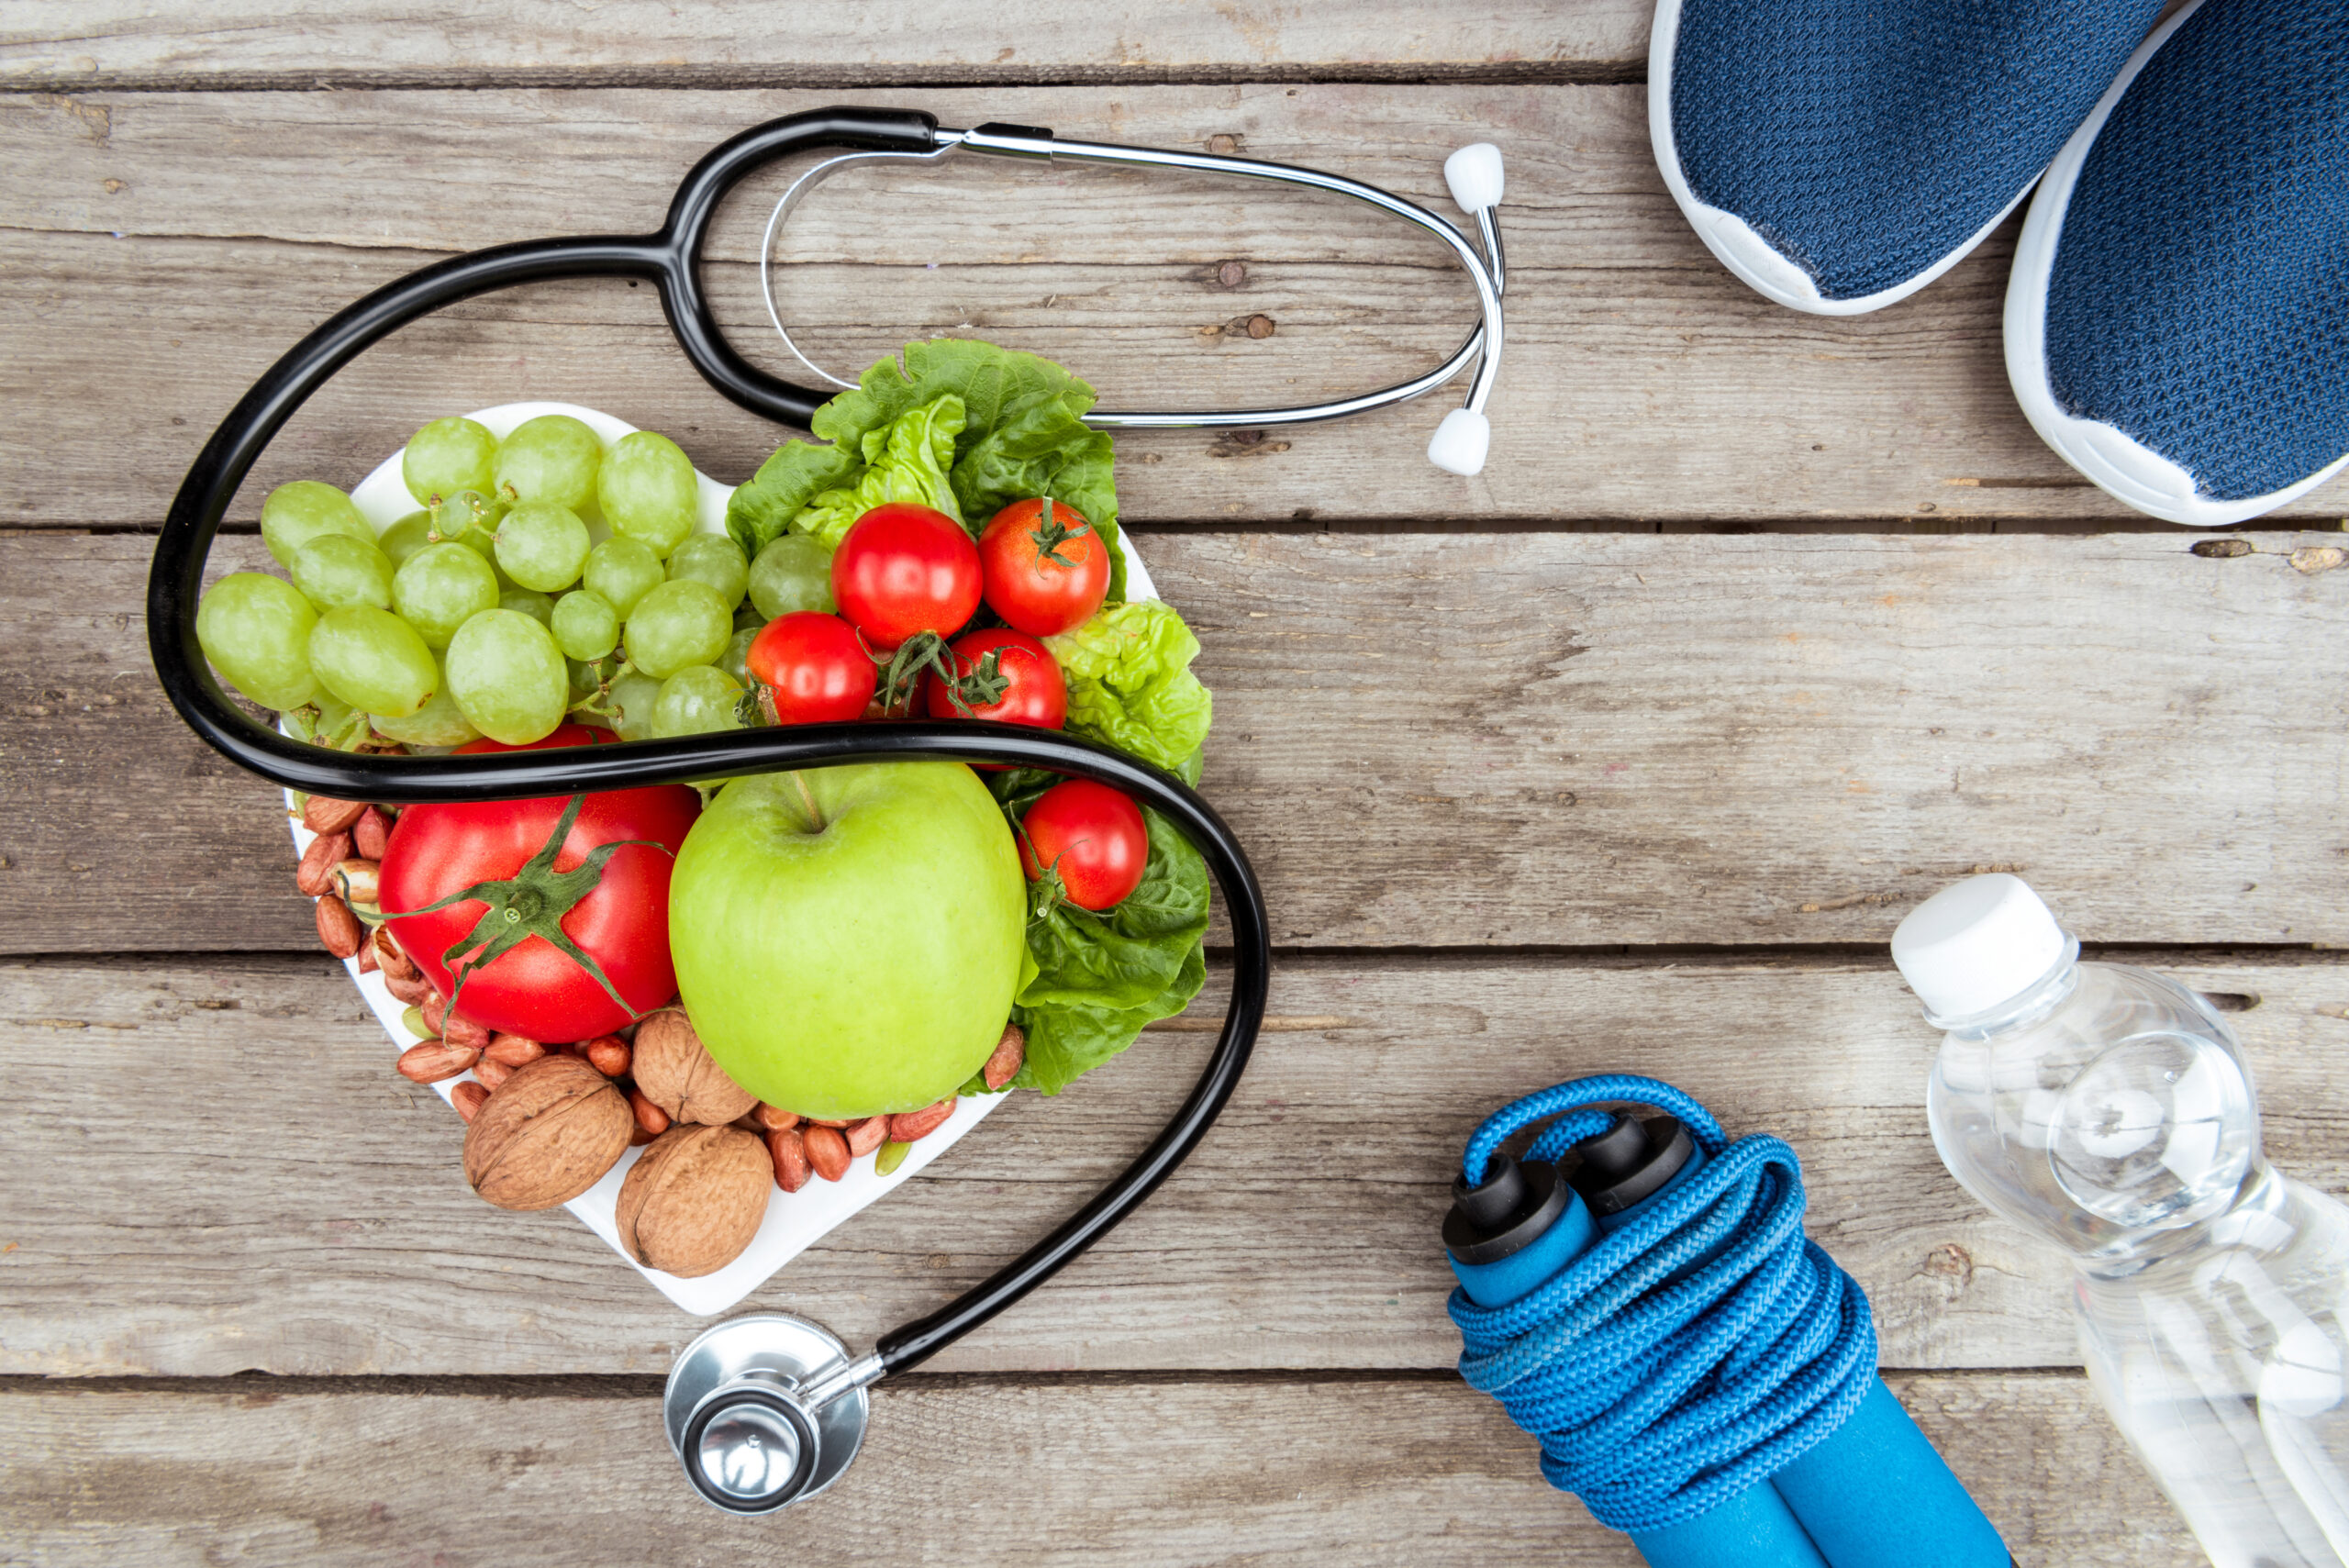 top view of stethoscope, organic vegetables and fruits and sport equipment on wooden surface,